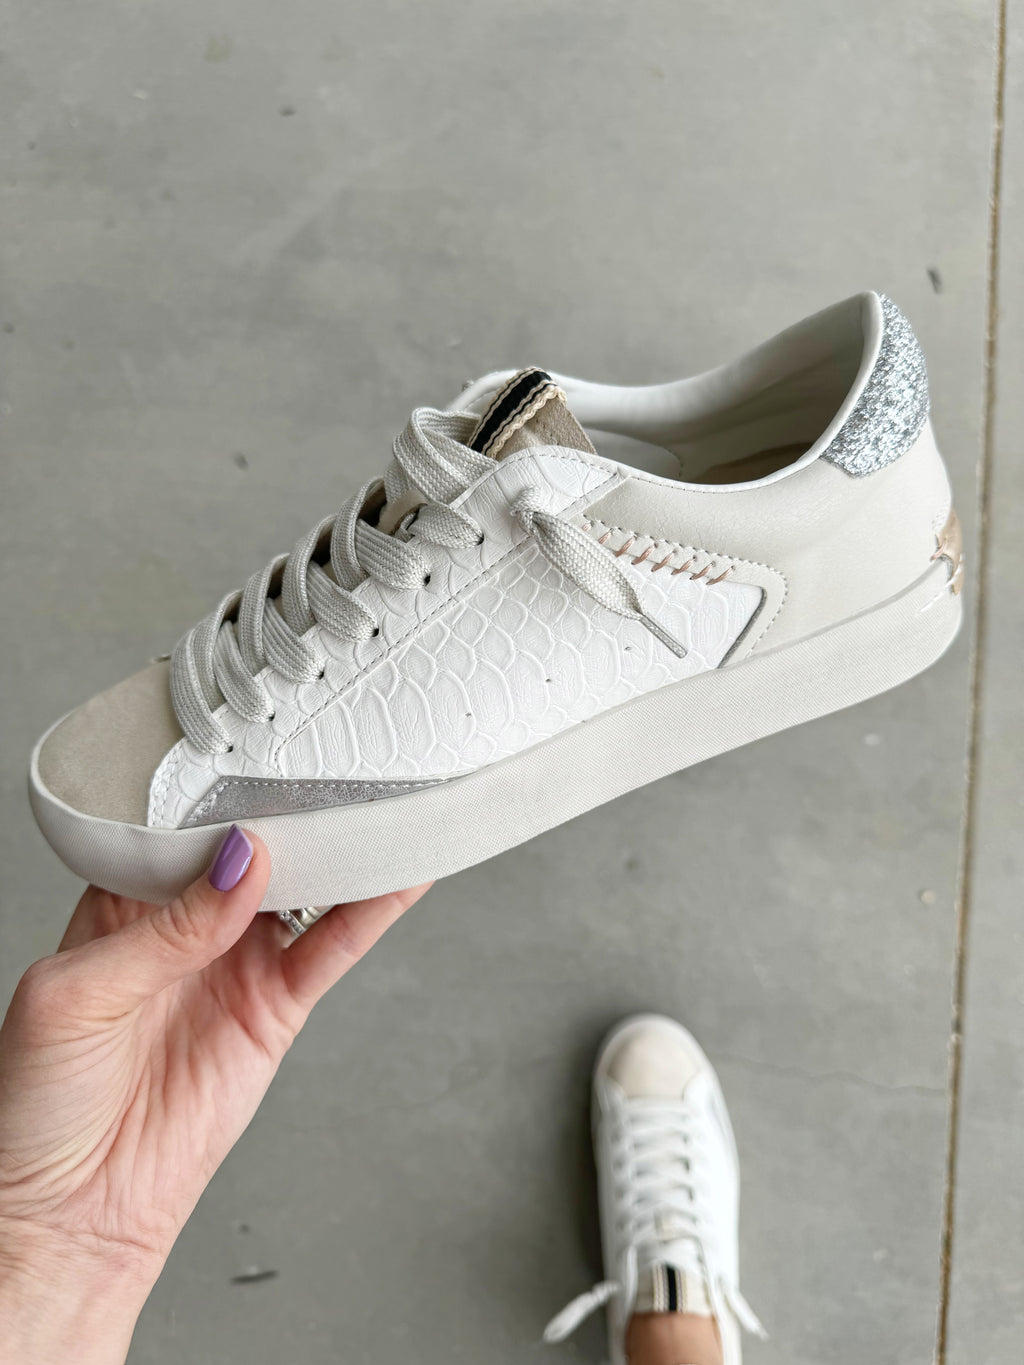 Shushop Ruby Sneakers in Ivory, Beige, and Silver